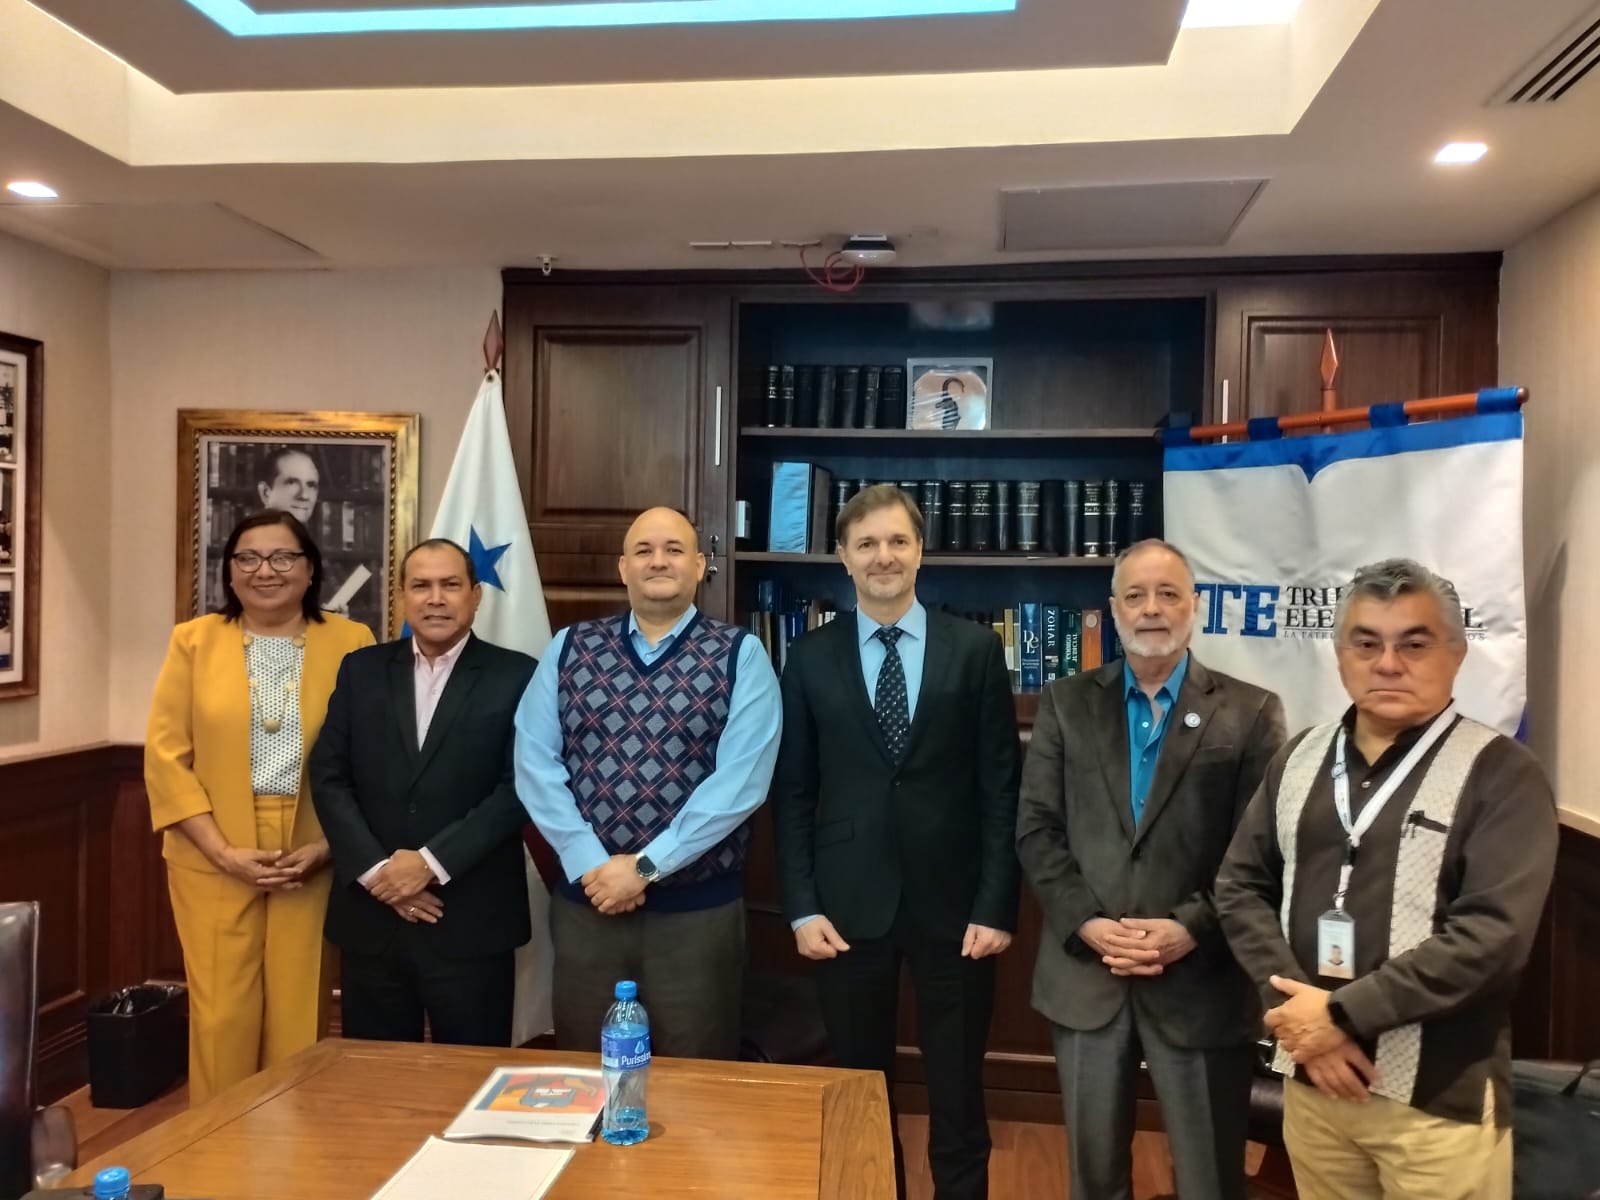 From left to right: Magistrate Yara Campo Berrío, Magistrate Luis Guerra Morales, Magistrate President Alfredo Juncá Wendehake, Specialist Sead Alihodzic, Magistrate Eduardo Valdés Escoffery, and Project Manager – Panama, Carlos González Martínez.